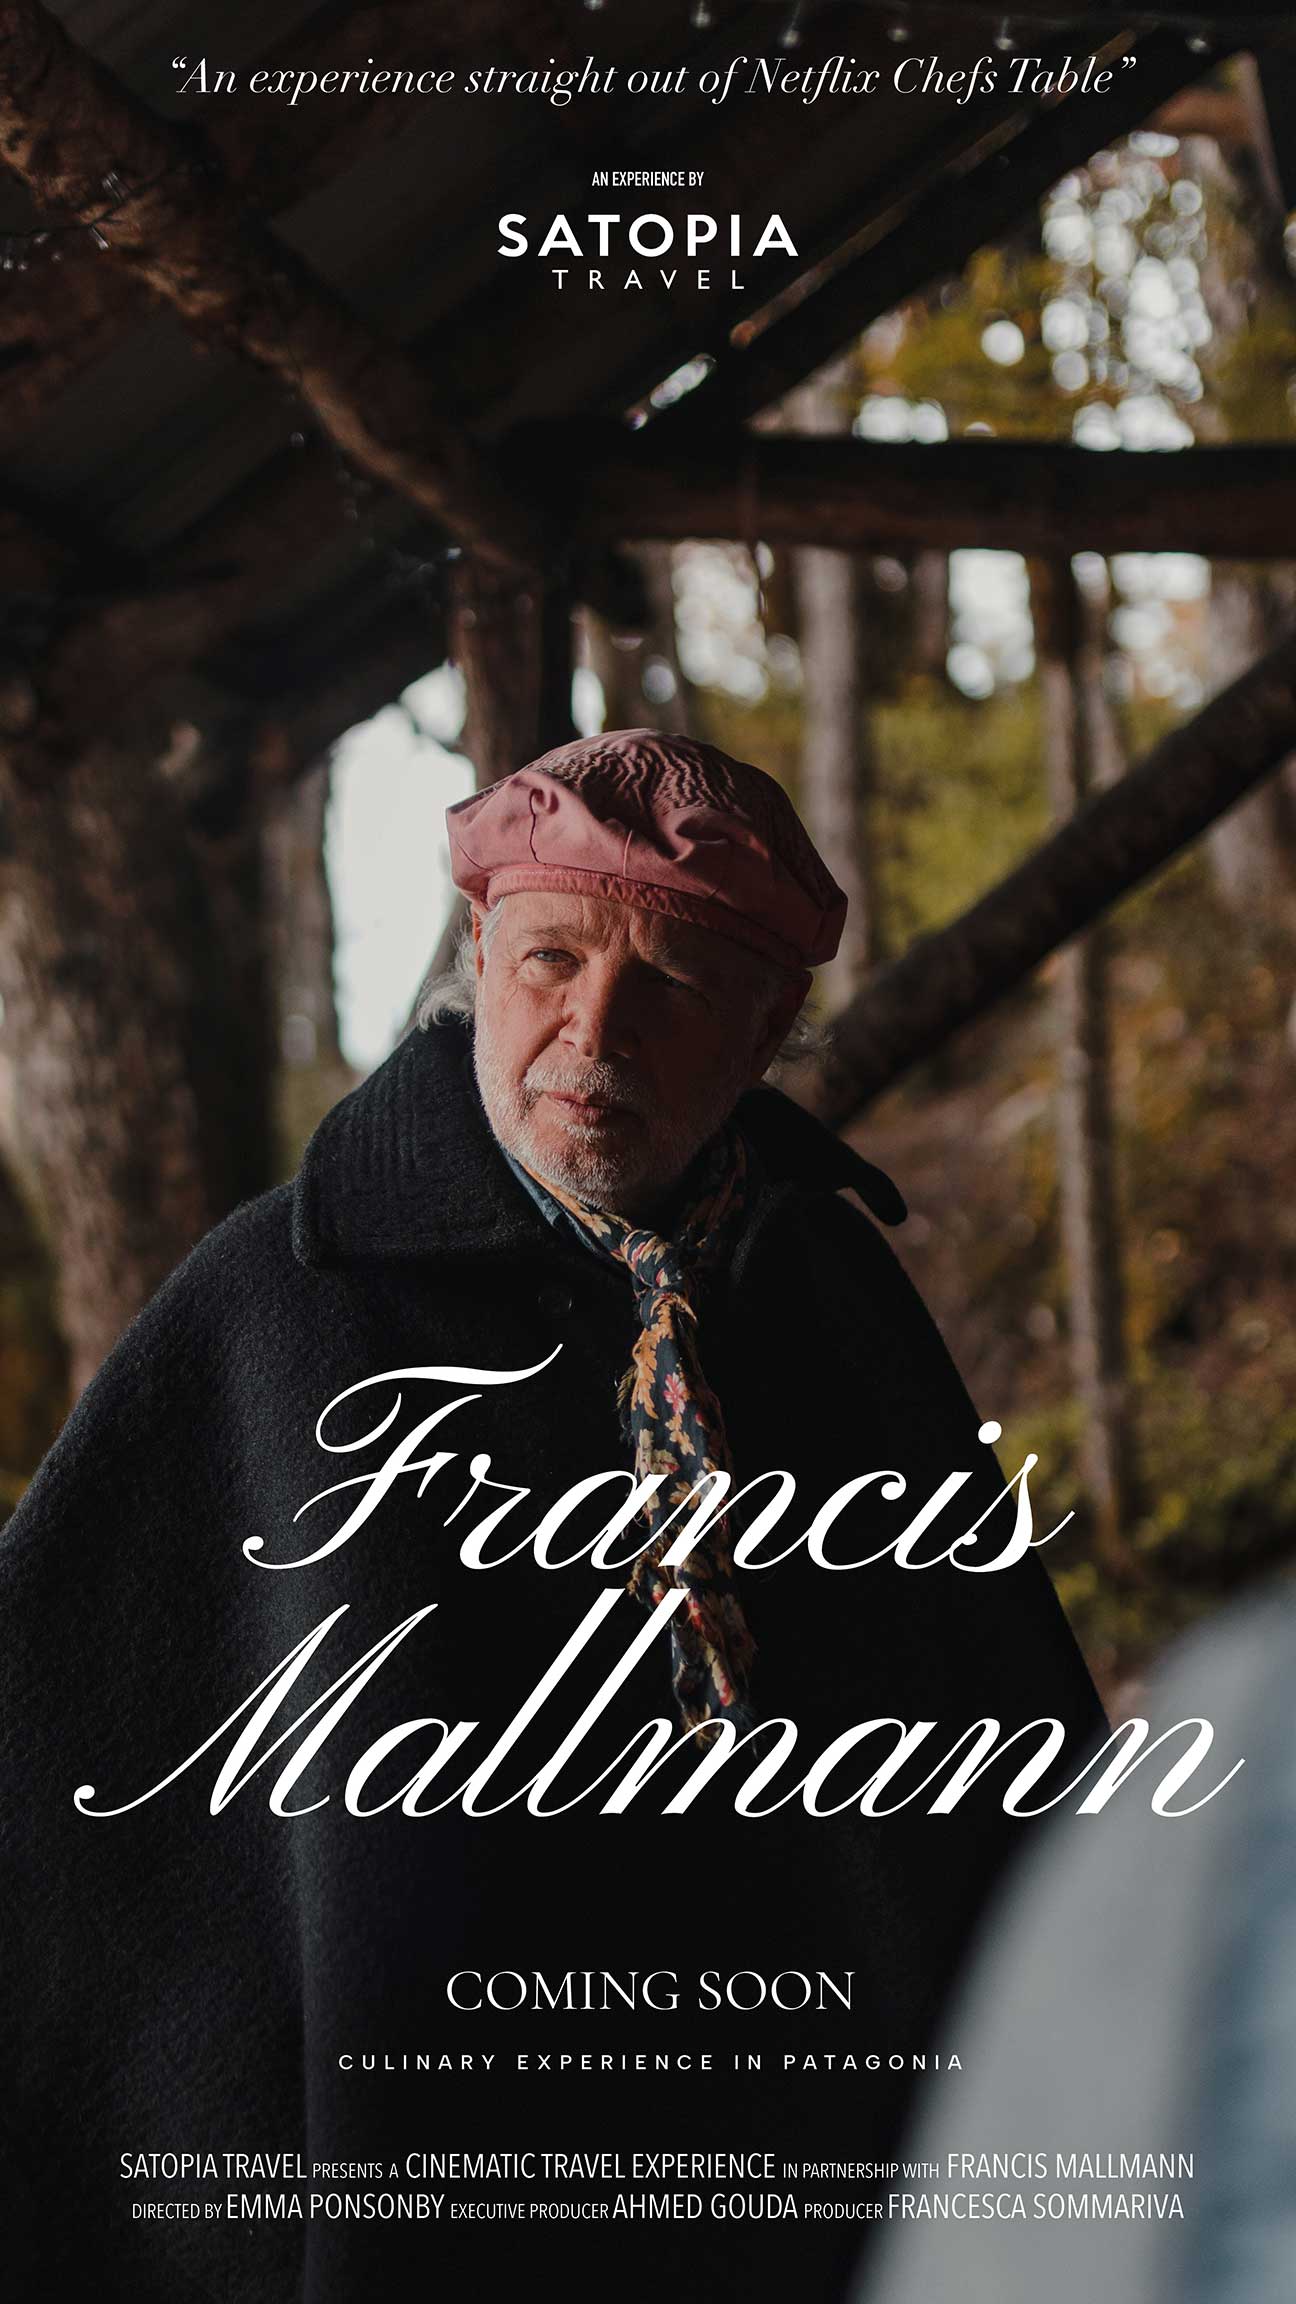 Vertical Movie Poster: Satopia Travel presents Culinary Hosted Experience with chef Francis Mallmann in Patagonia.